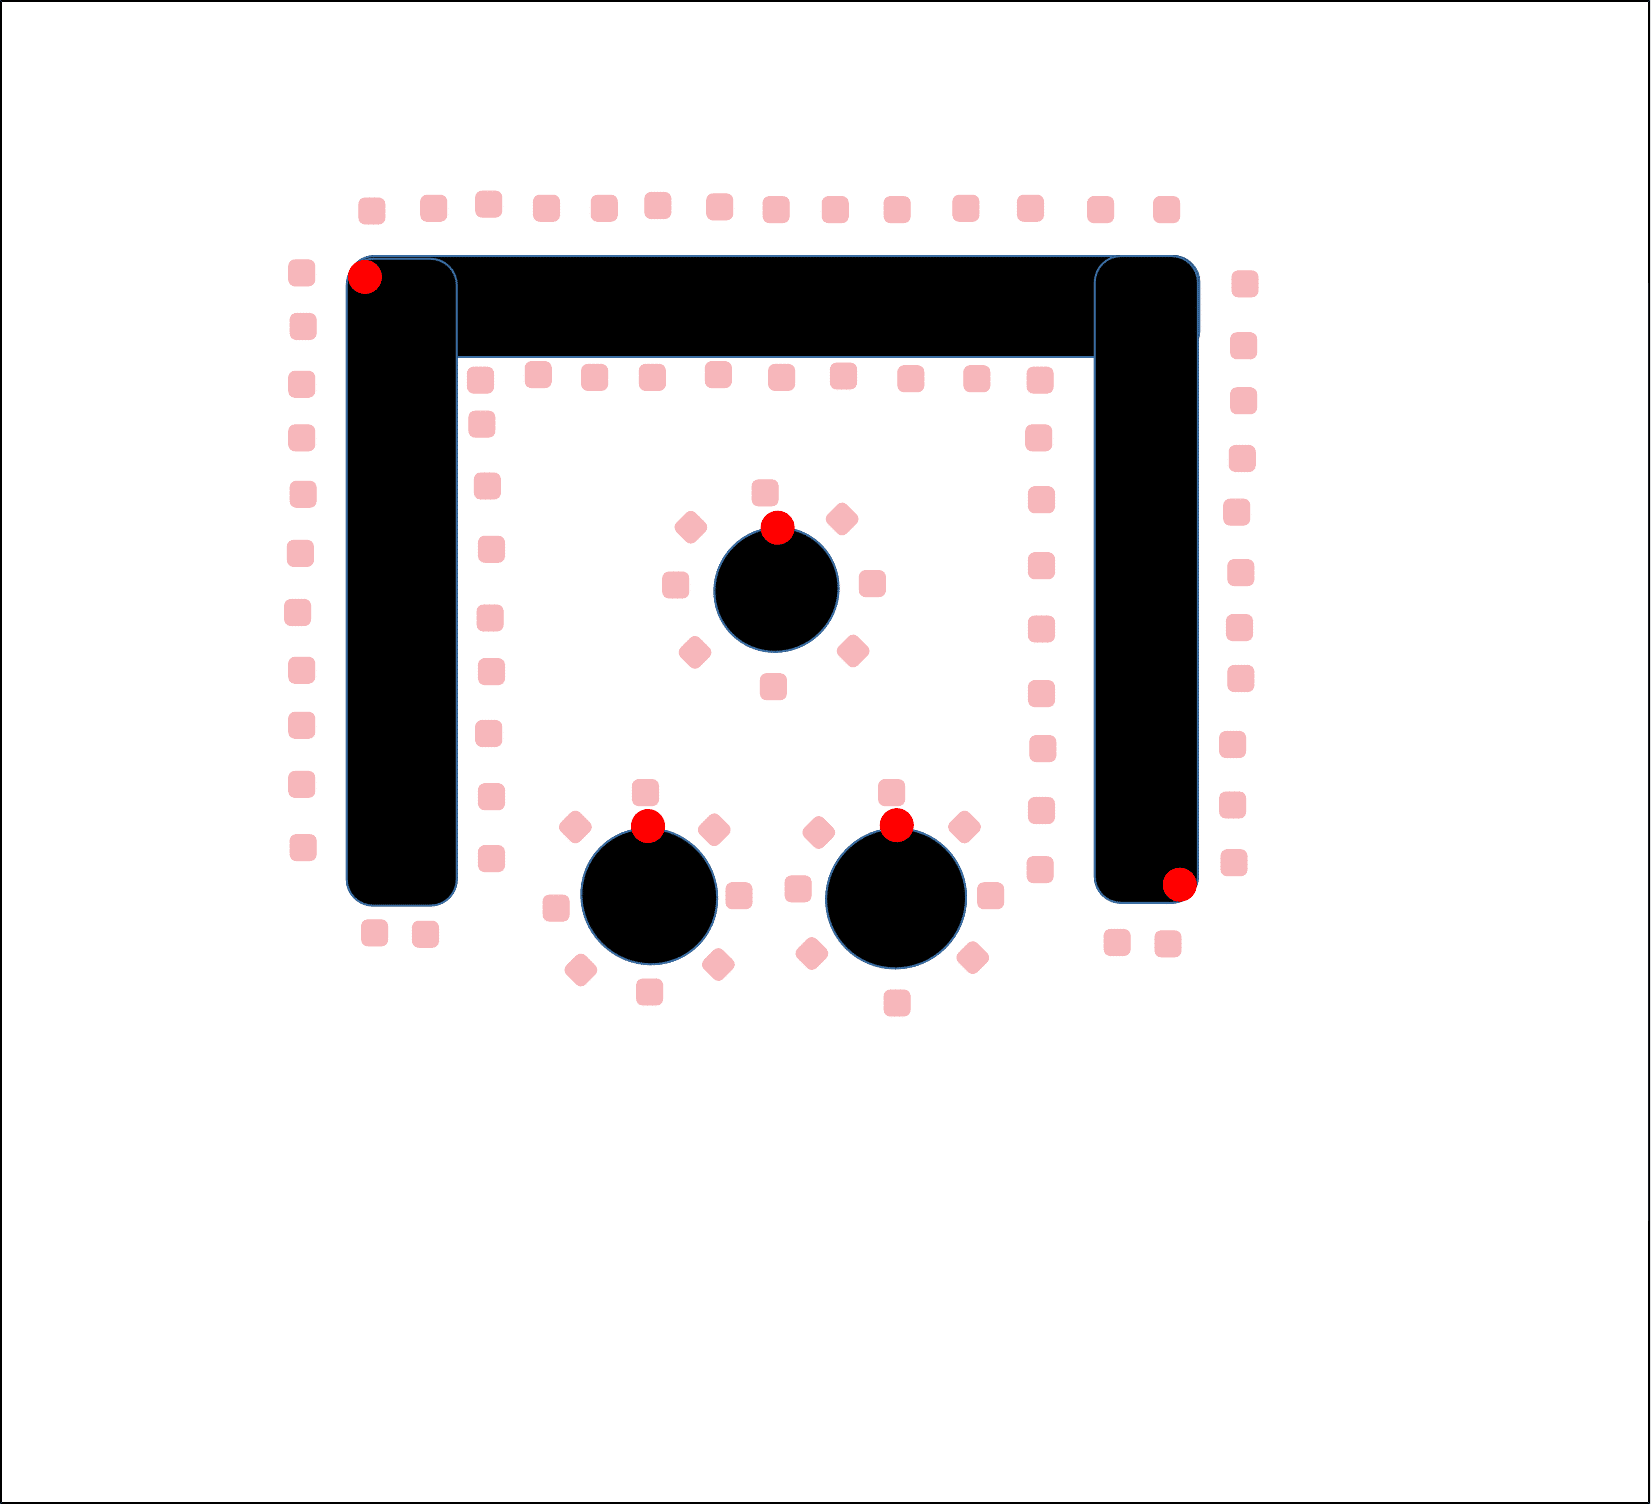 A picture of a square with dots on it, showing the use of tools during a wedding.